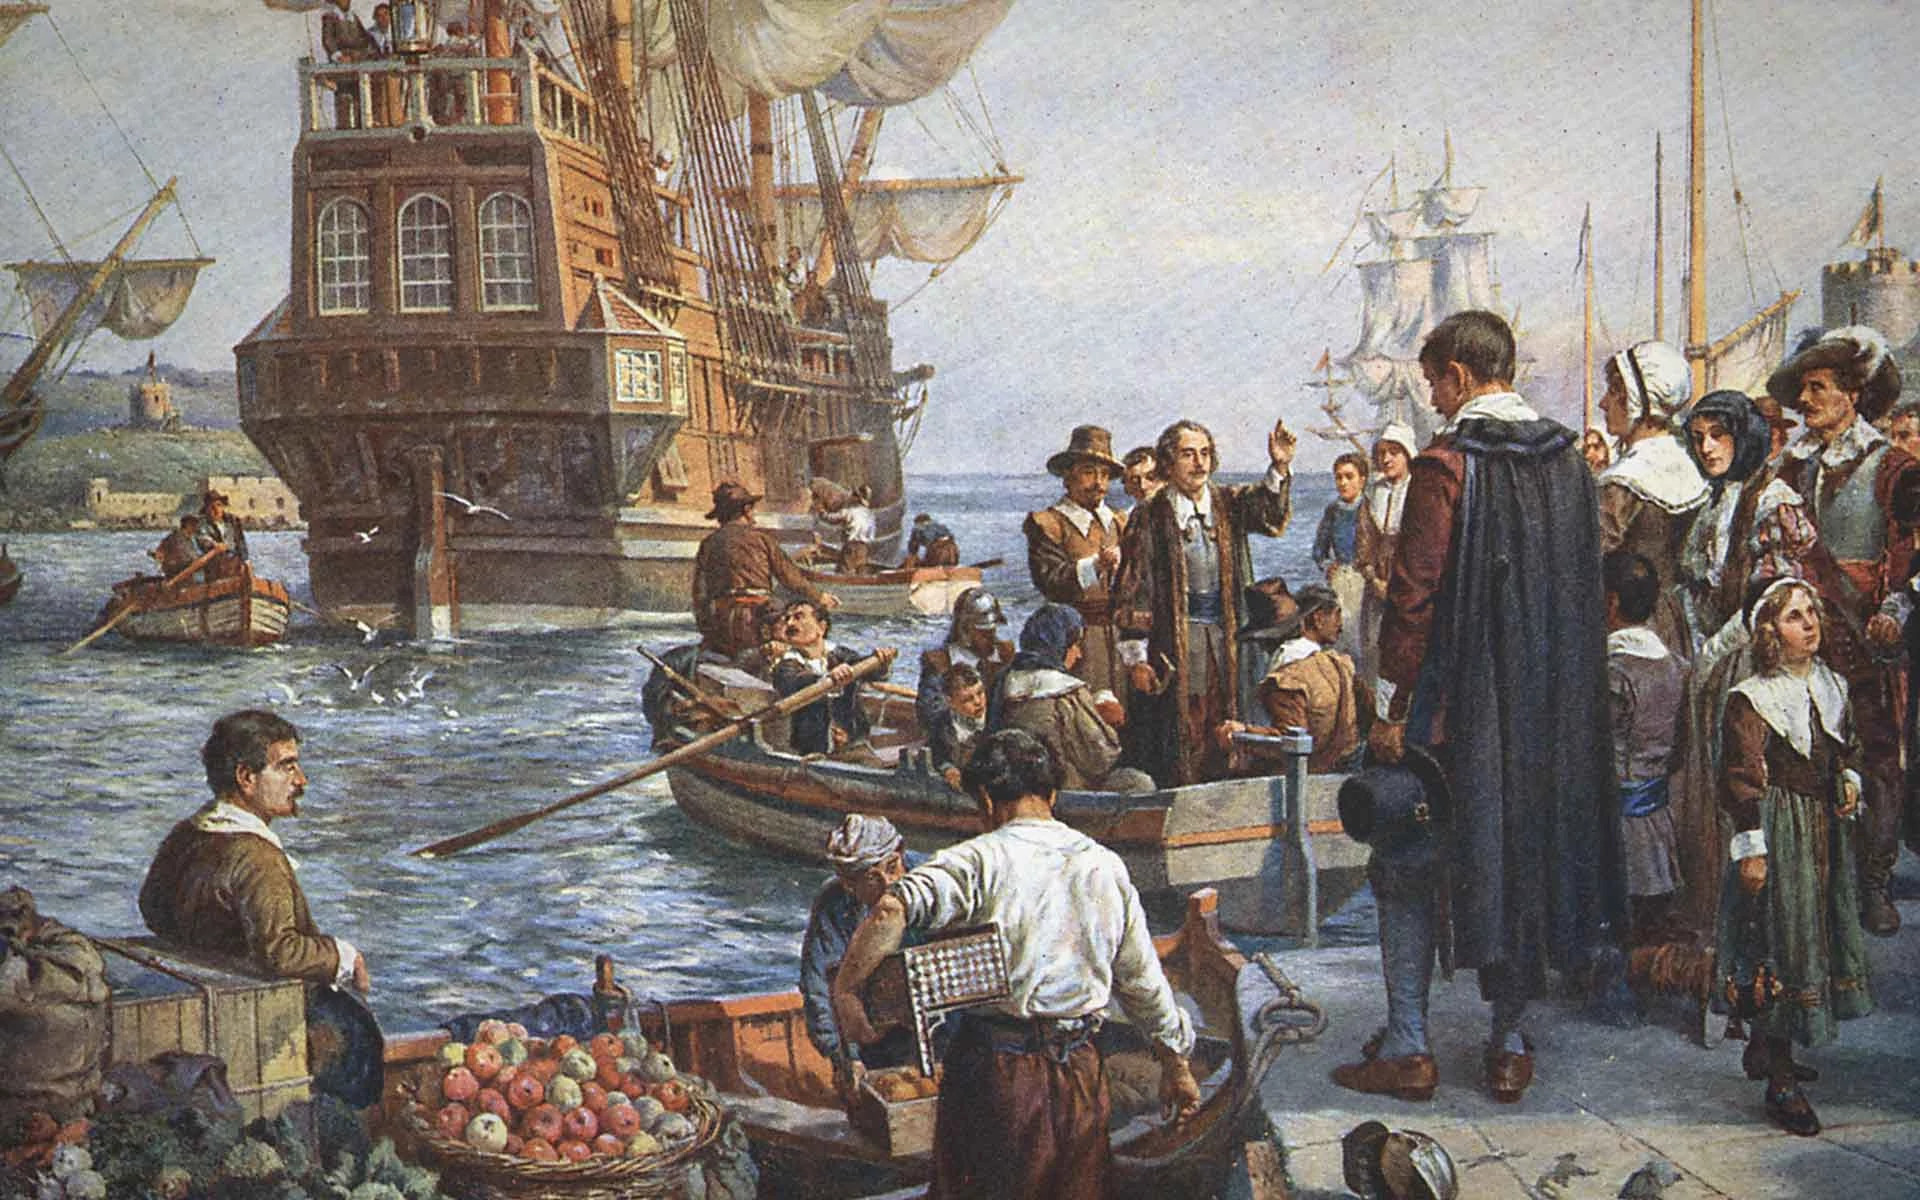 God’s Providence: The Voyage of the Mayflower - Part 1